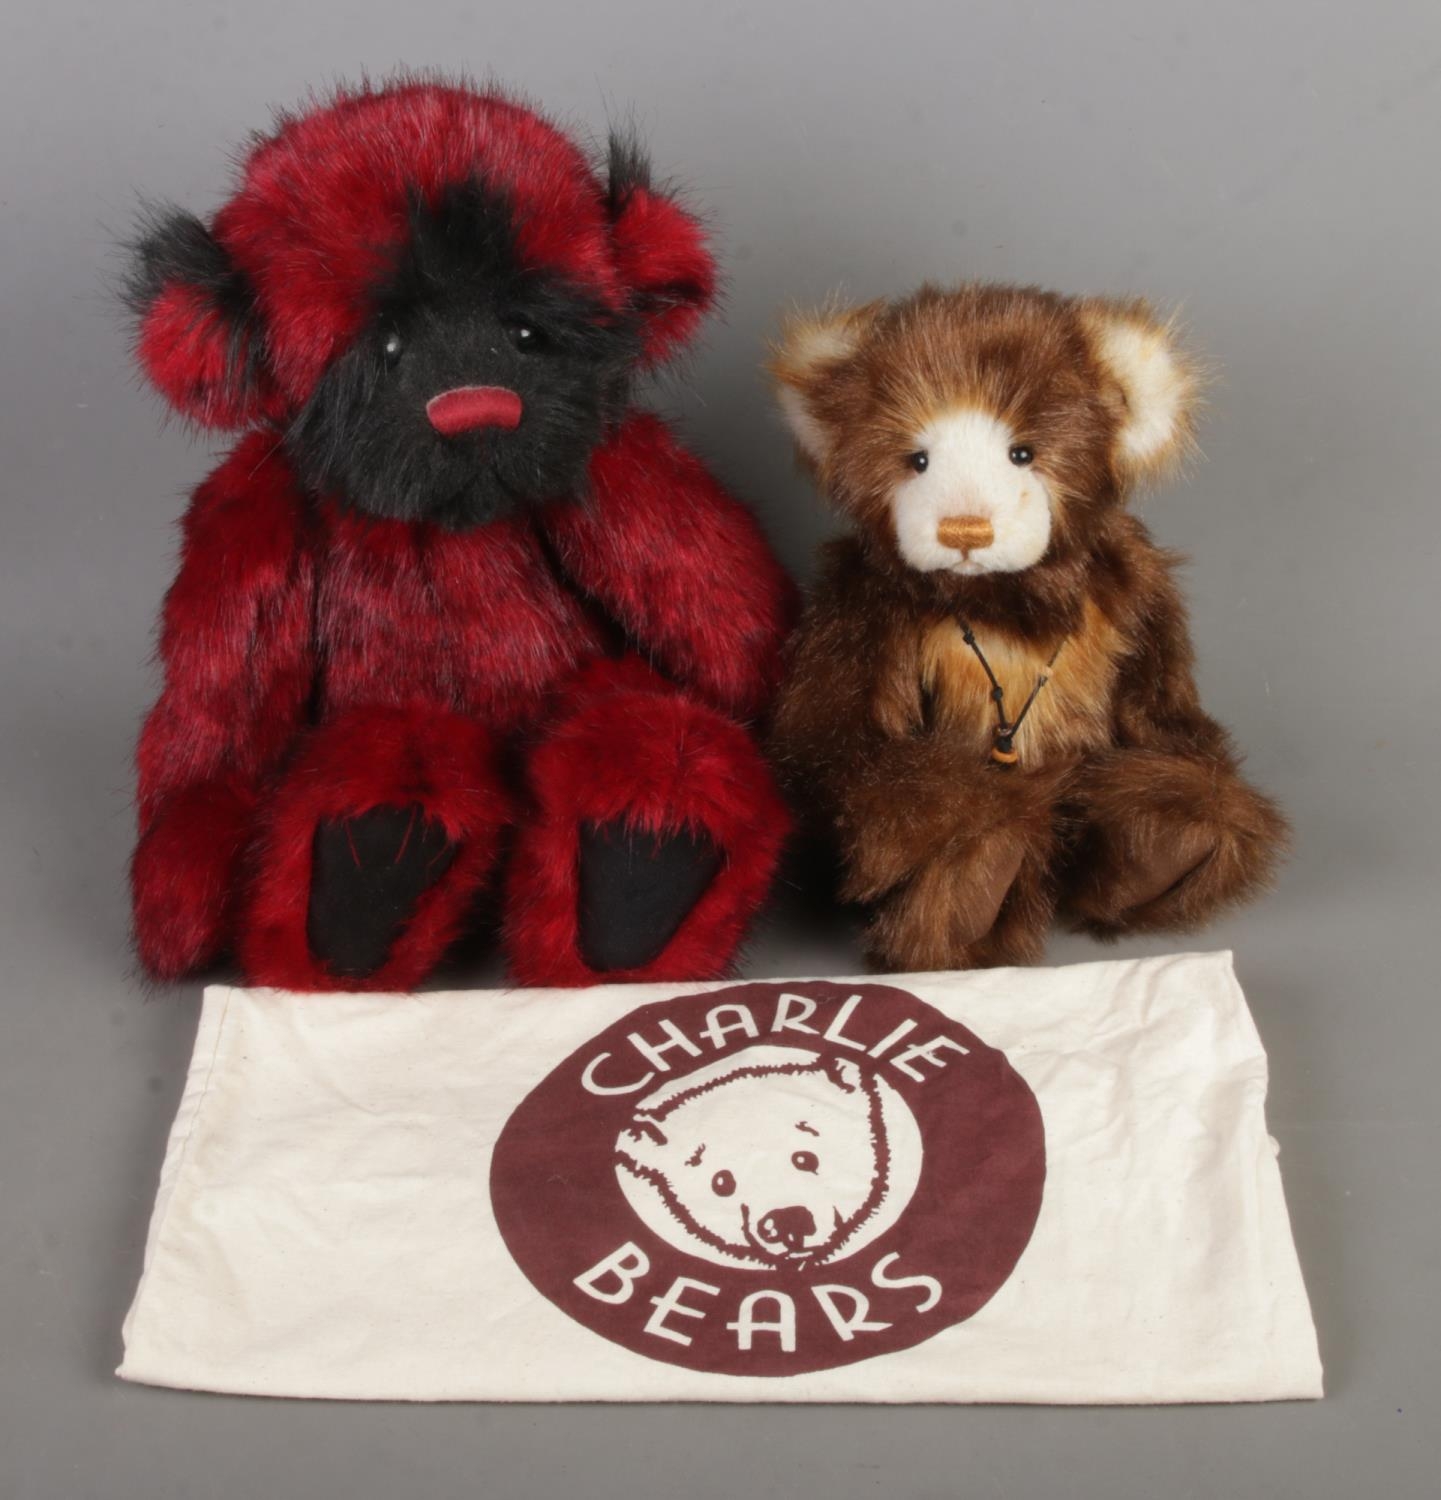 Two Charlie Bears jointed bears named Clancy (CB161508O) designed by Heather Lyell and Becky (